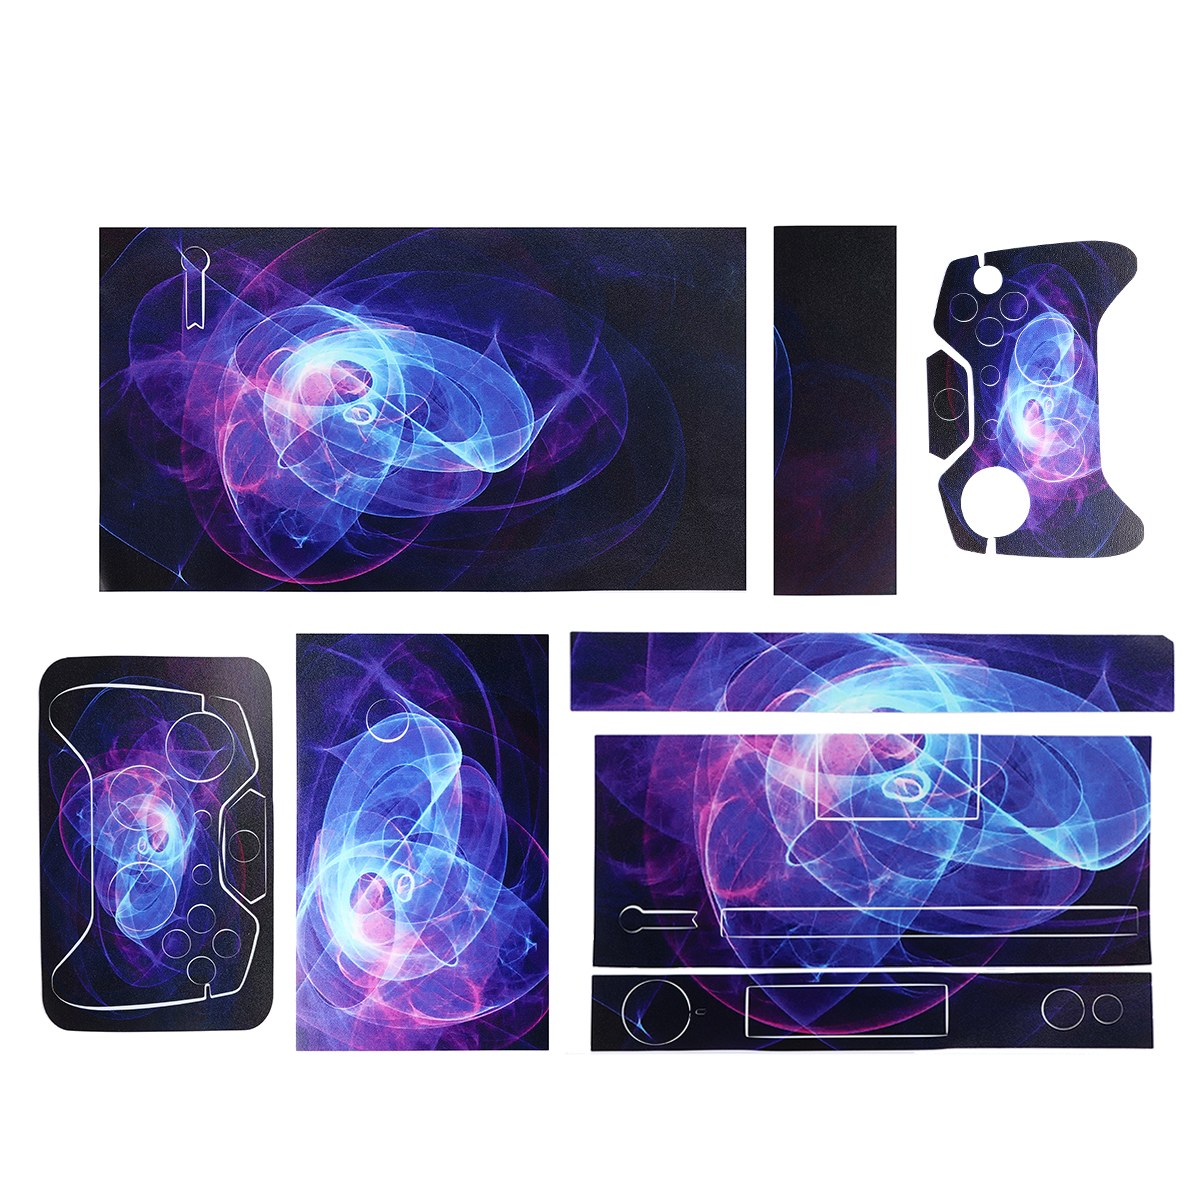 Purple Protective Vinyl Decal Skin Stickers Wrap Cover For Xbox One Game Console Game Controller Kinect 28